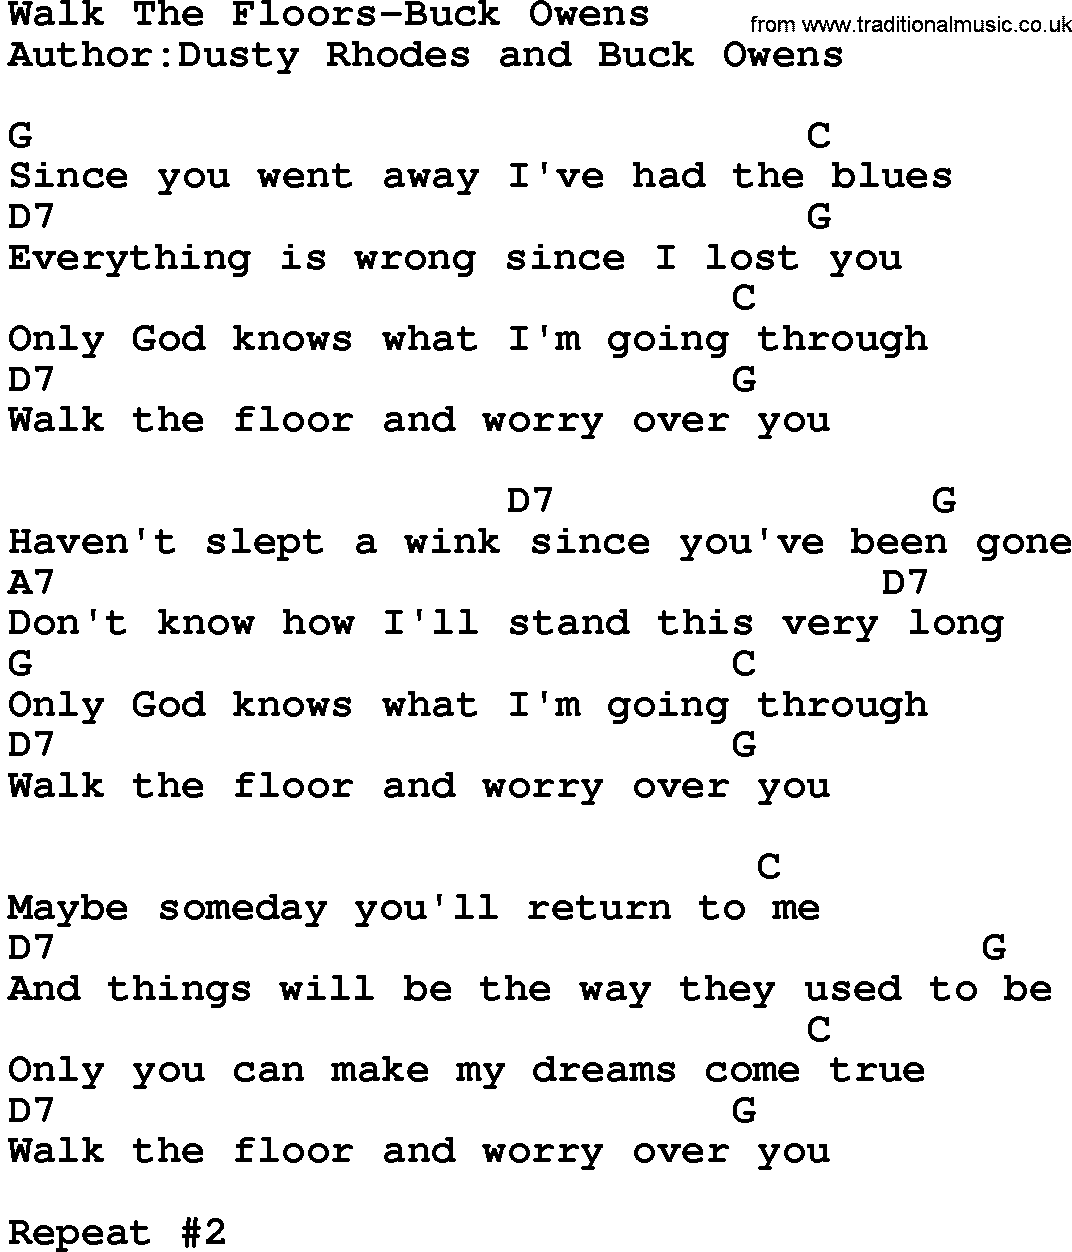 Country music song: Walk The Floors-Buck Owens lyrics and chords